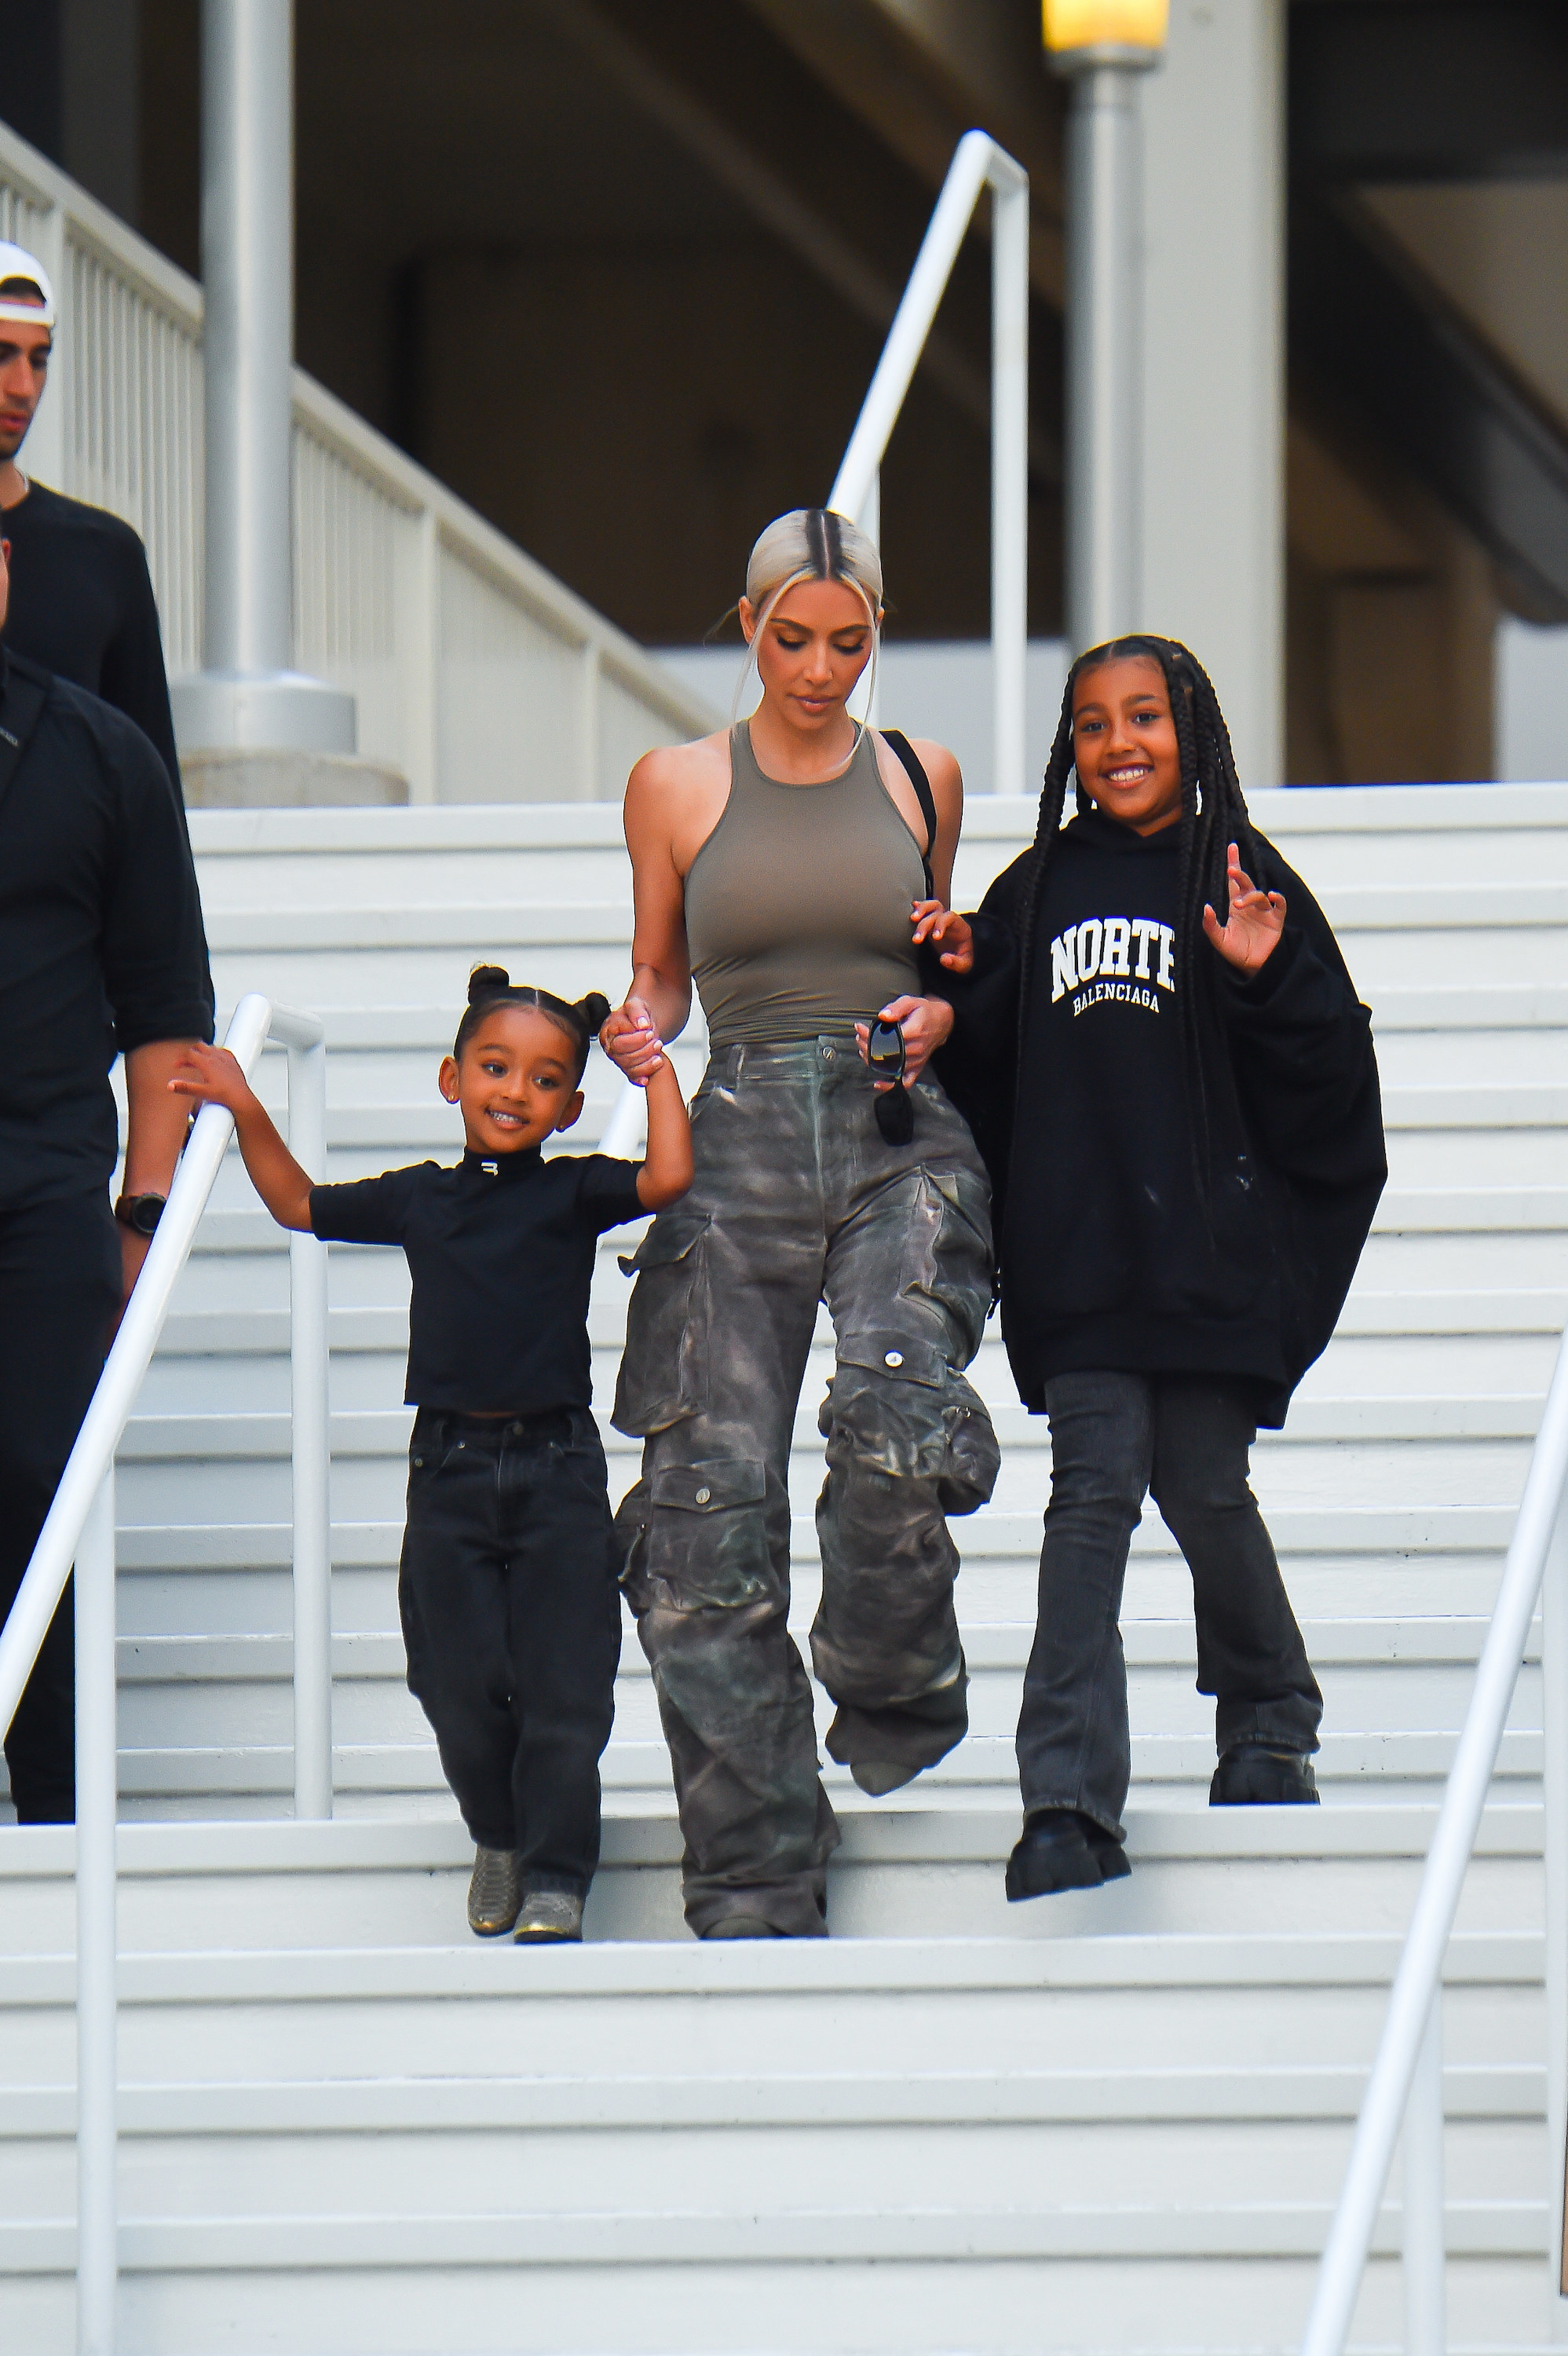 Kim walking down stairs with two of her kids